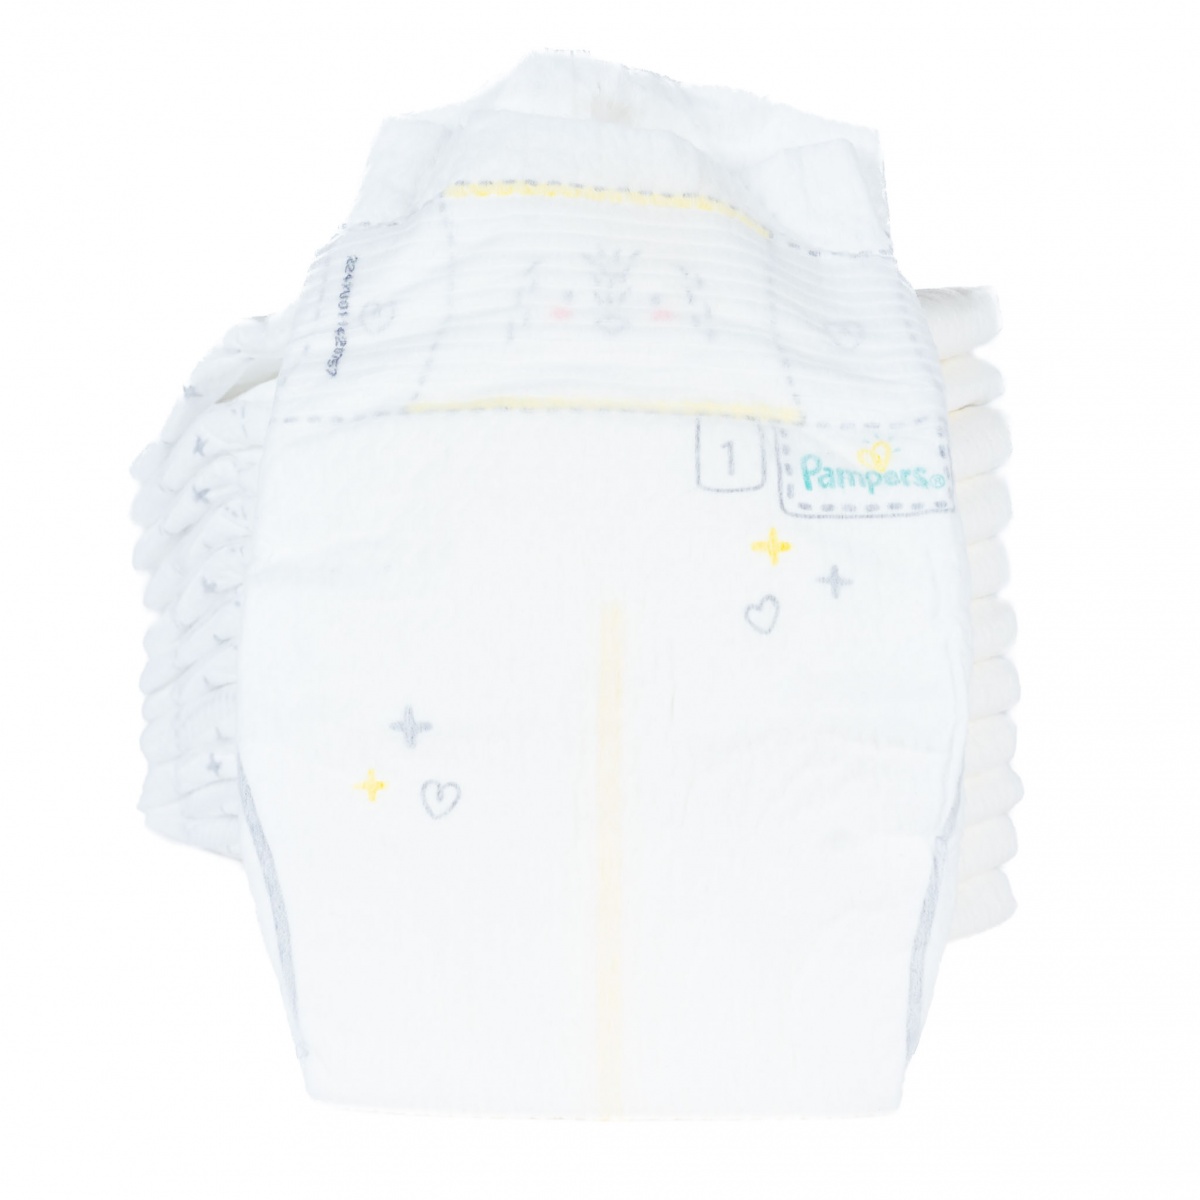 Pampers Swaddlers Diapers  